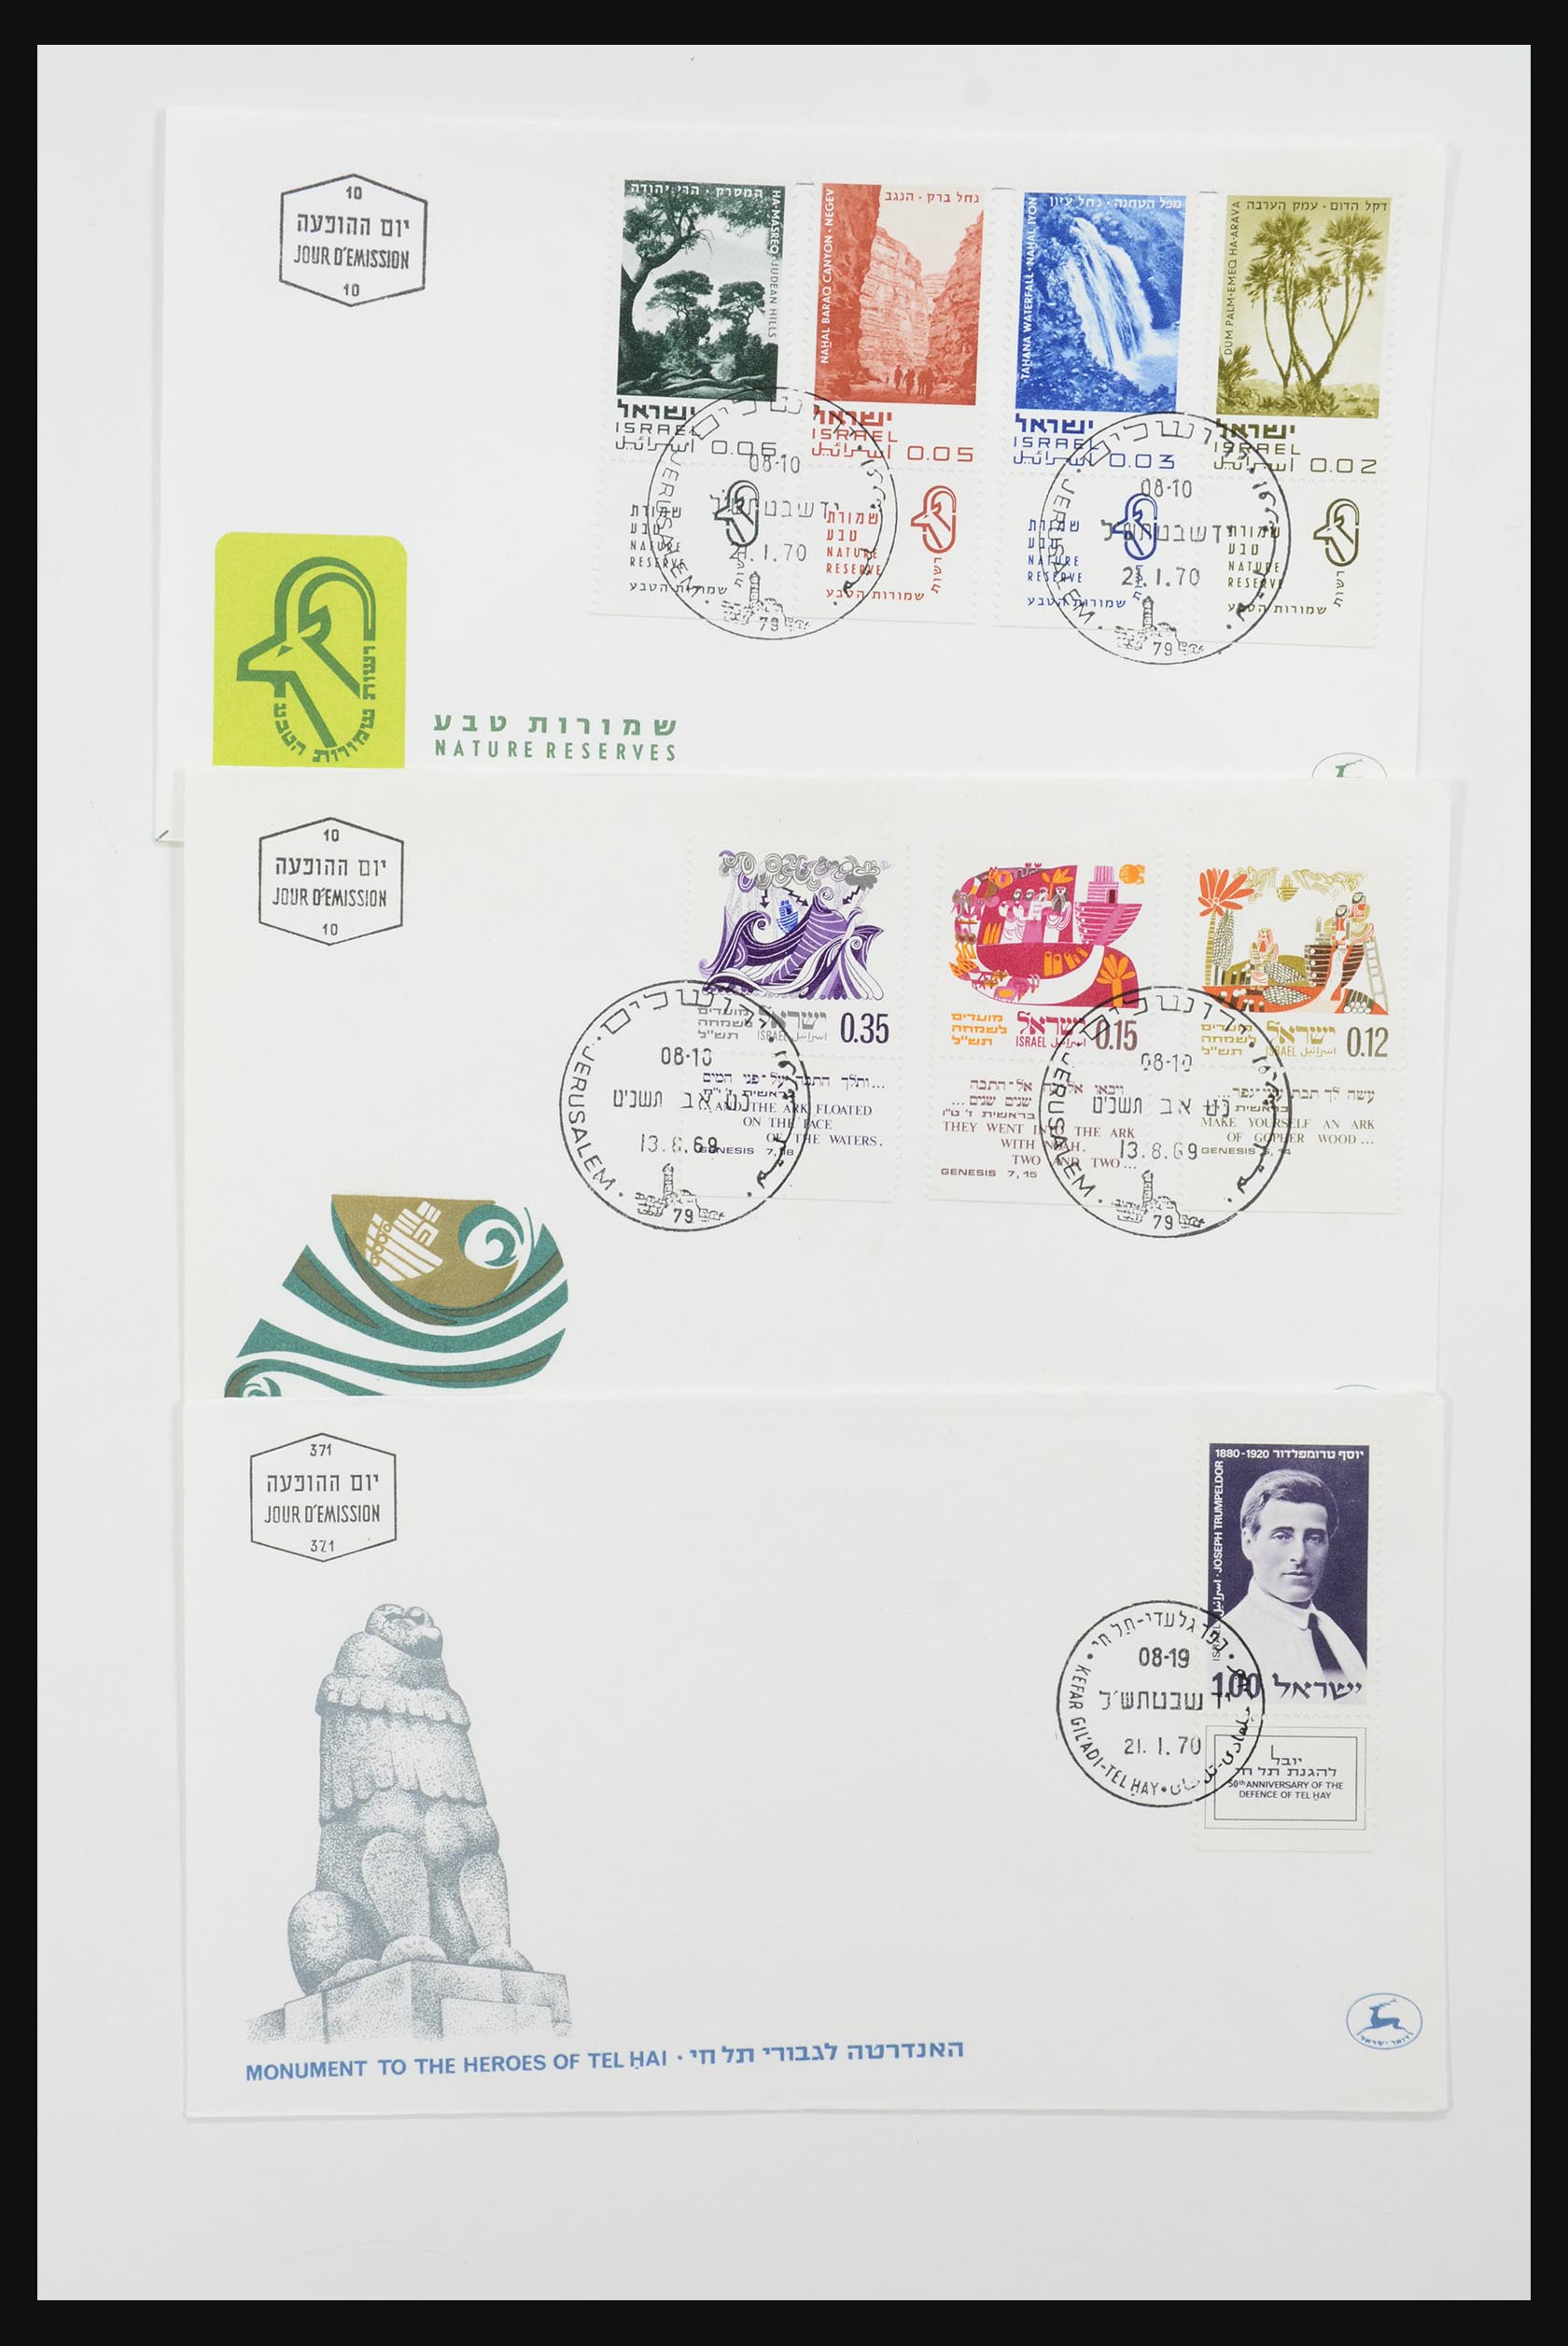 31924 580 - 31924 Israel first day cover collection 1957-2003.